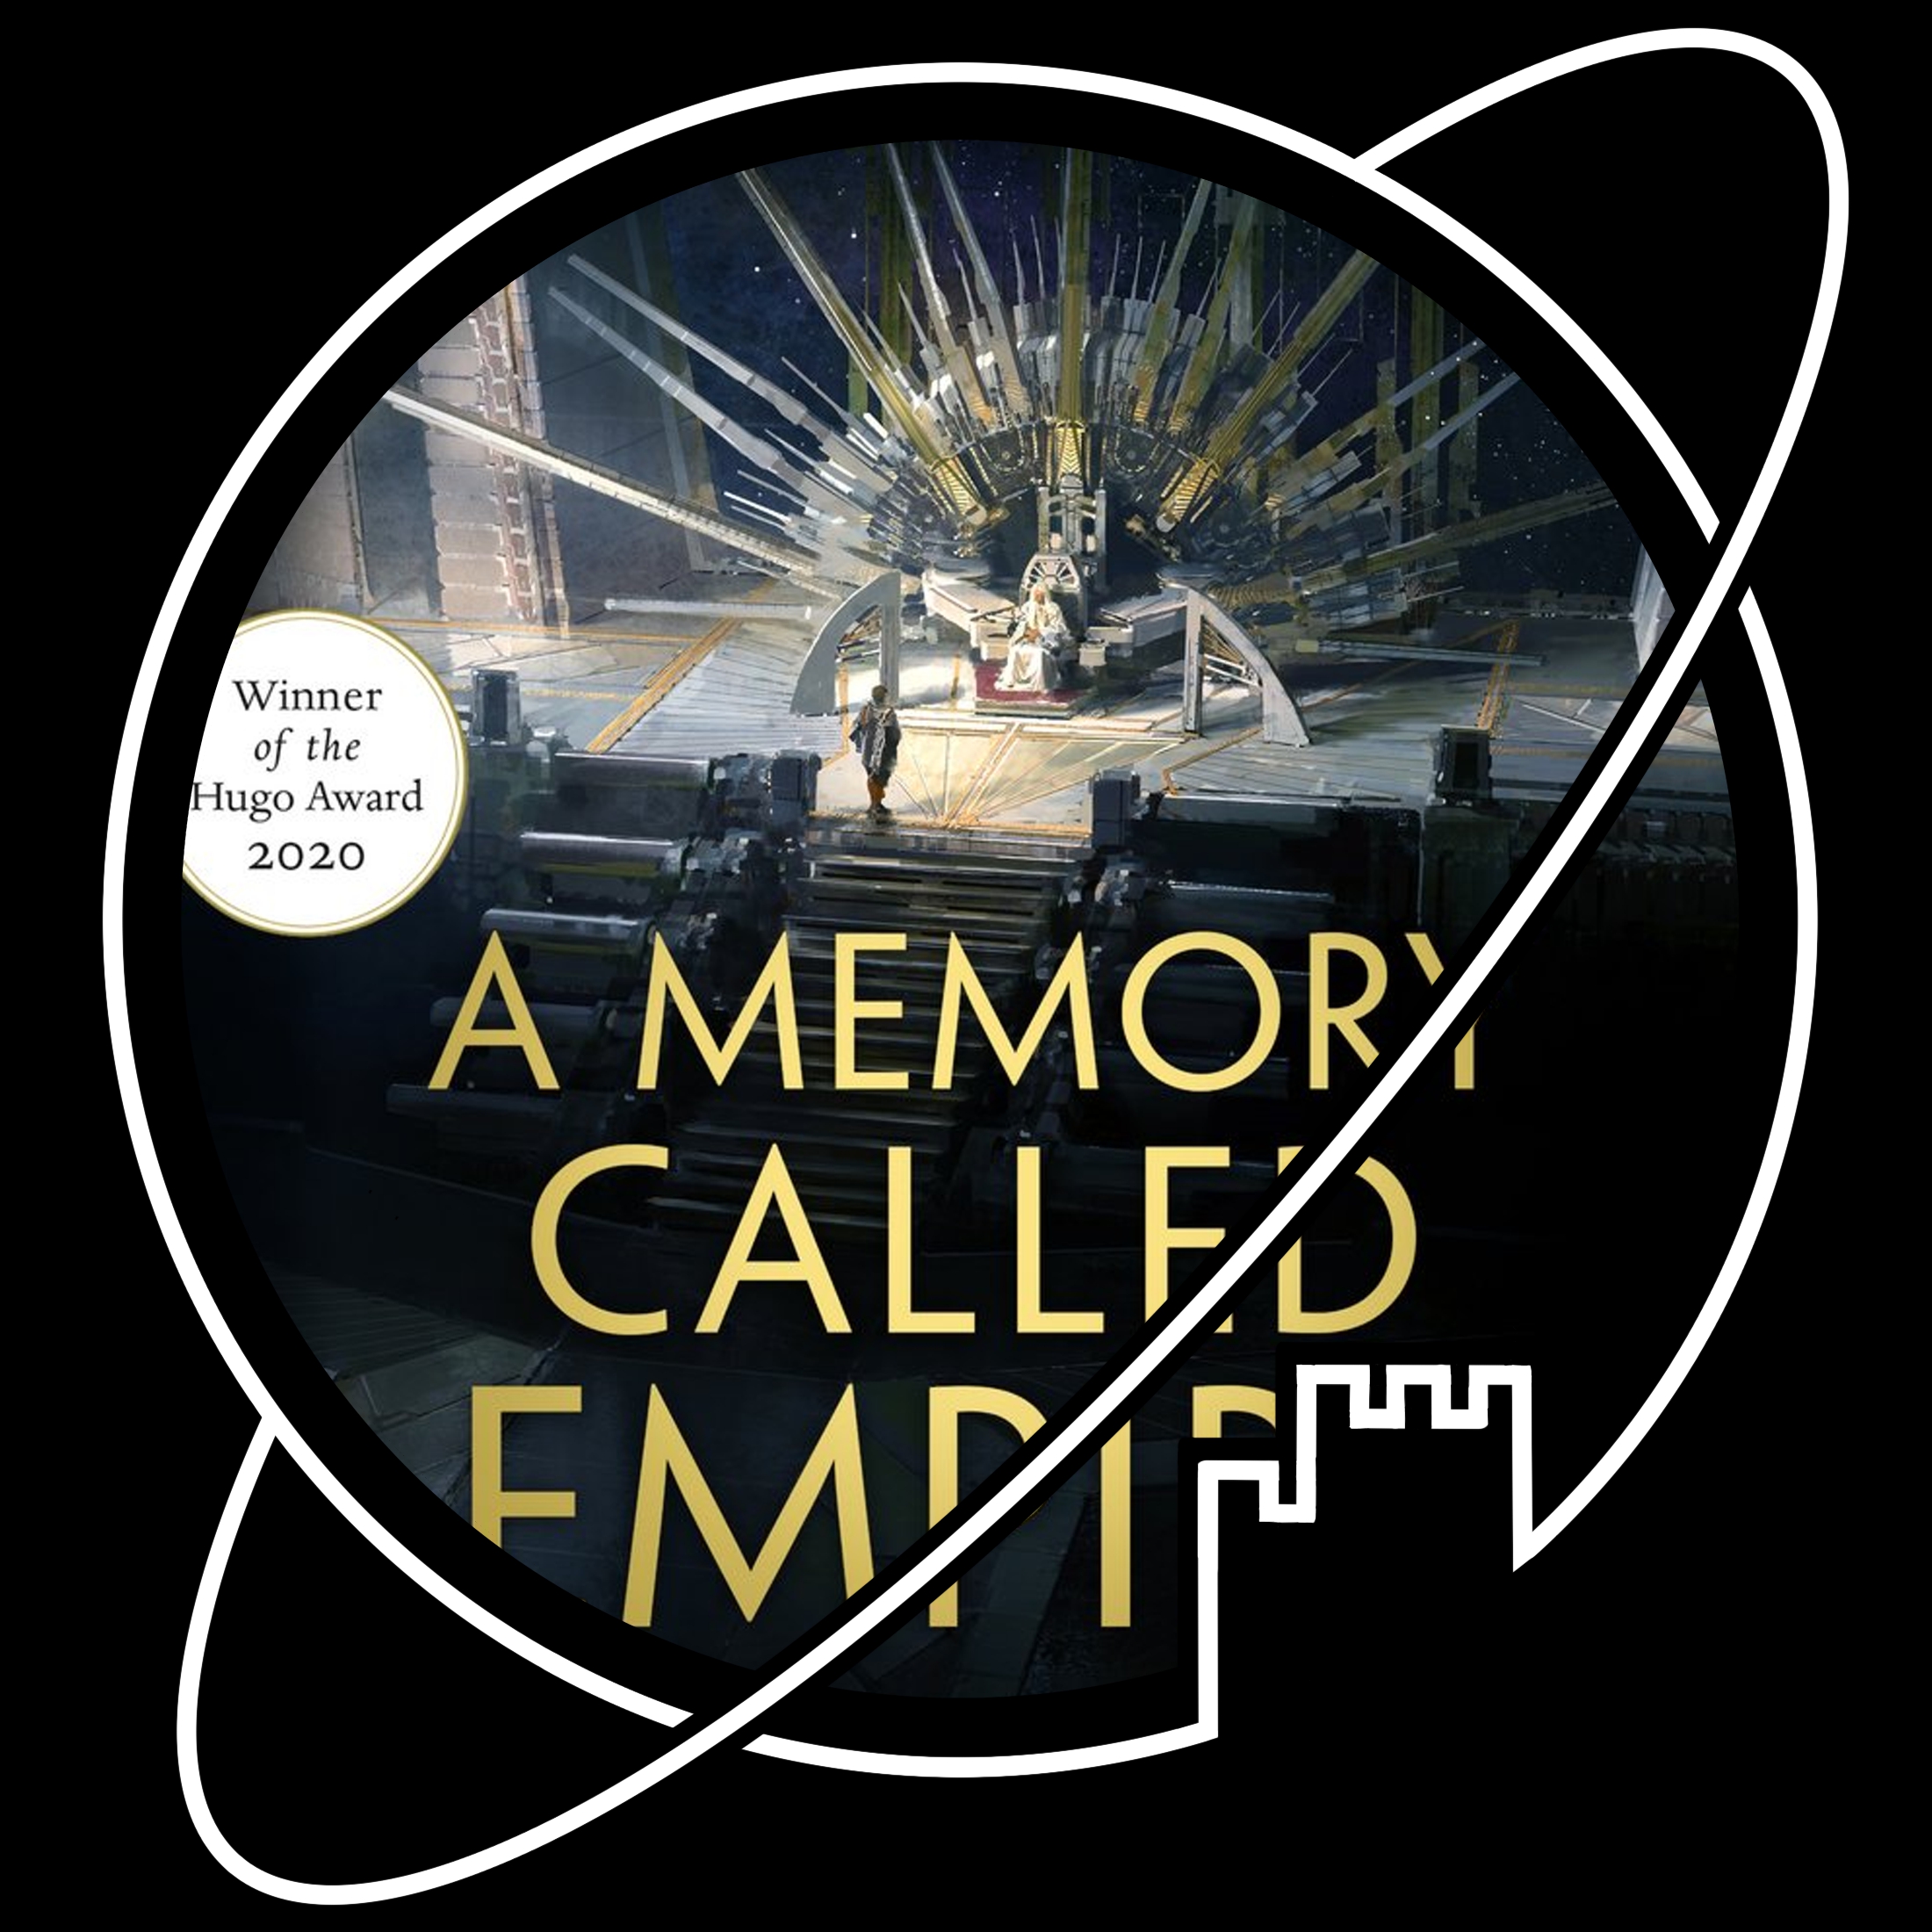 a memory called empire goodreads